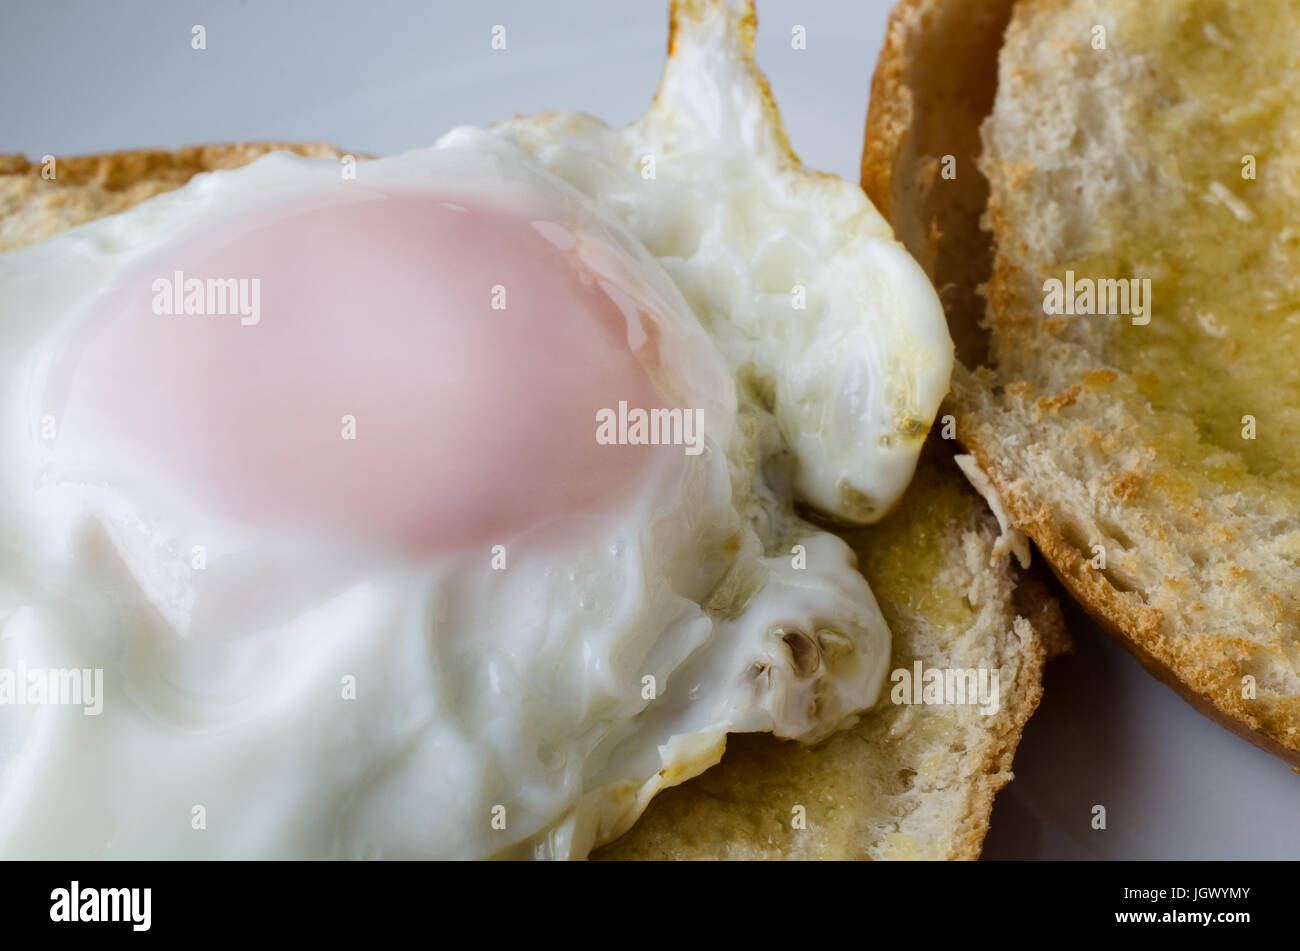 Close up shot of  free range fried egg on a toasted, sliced bagel. Still whole and ready to eat. Stock Photo